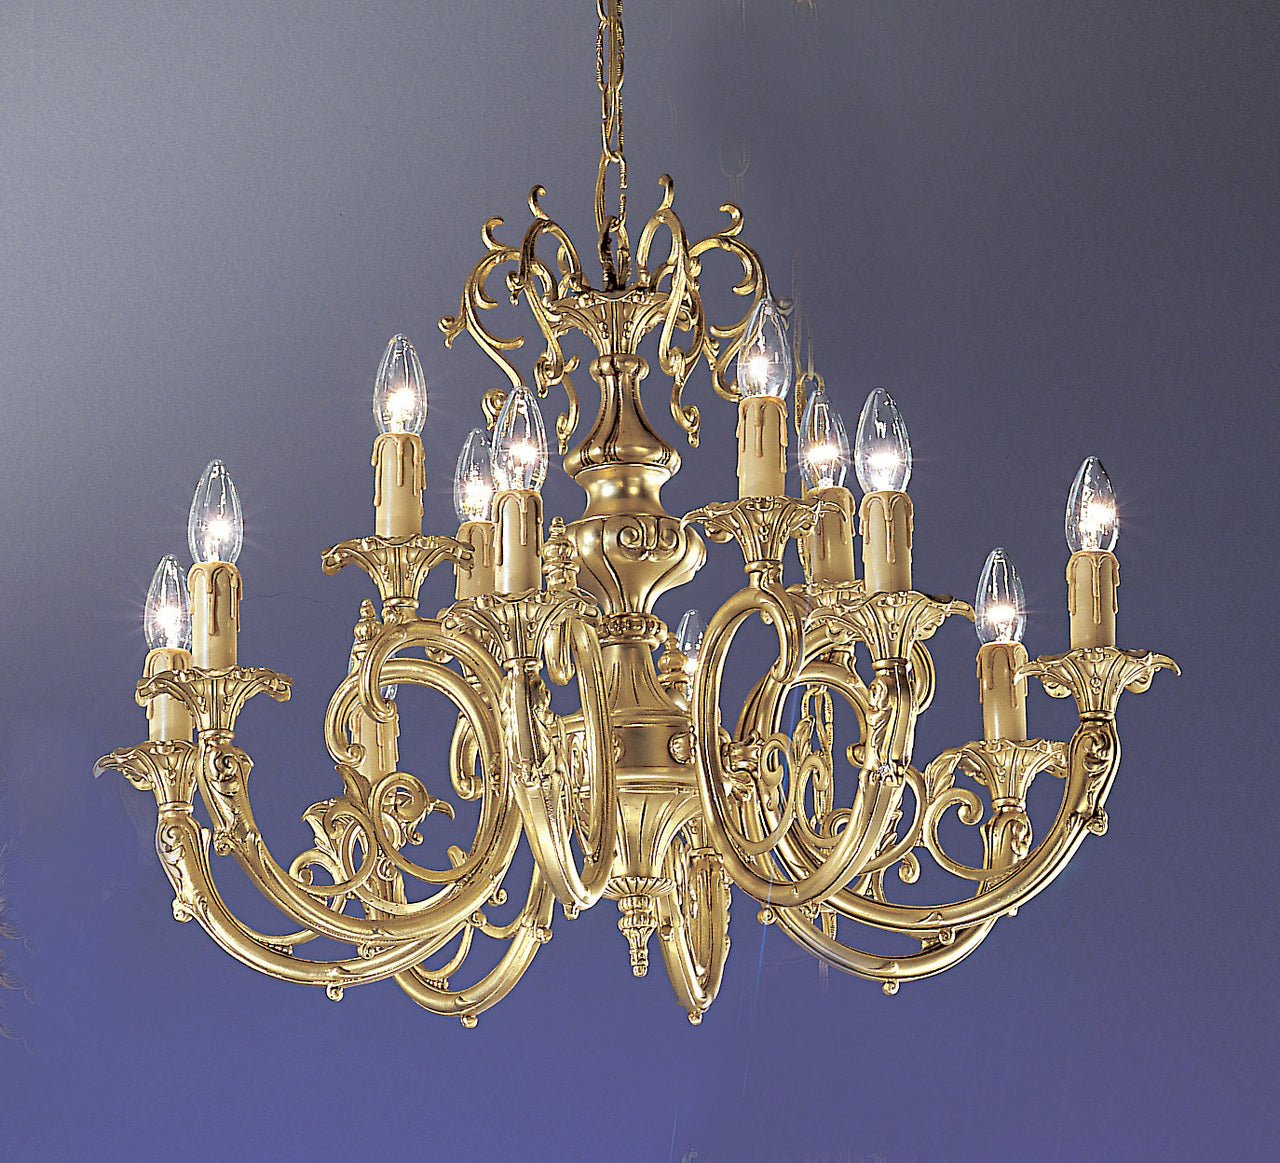 Classic Lighting 5712 SBB S Princeton Crystal/Cast Brass Chandelier in Satin Bronze/Brown Patina (Imported from Spain)